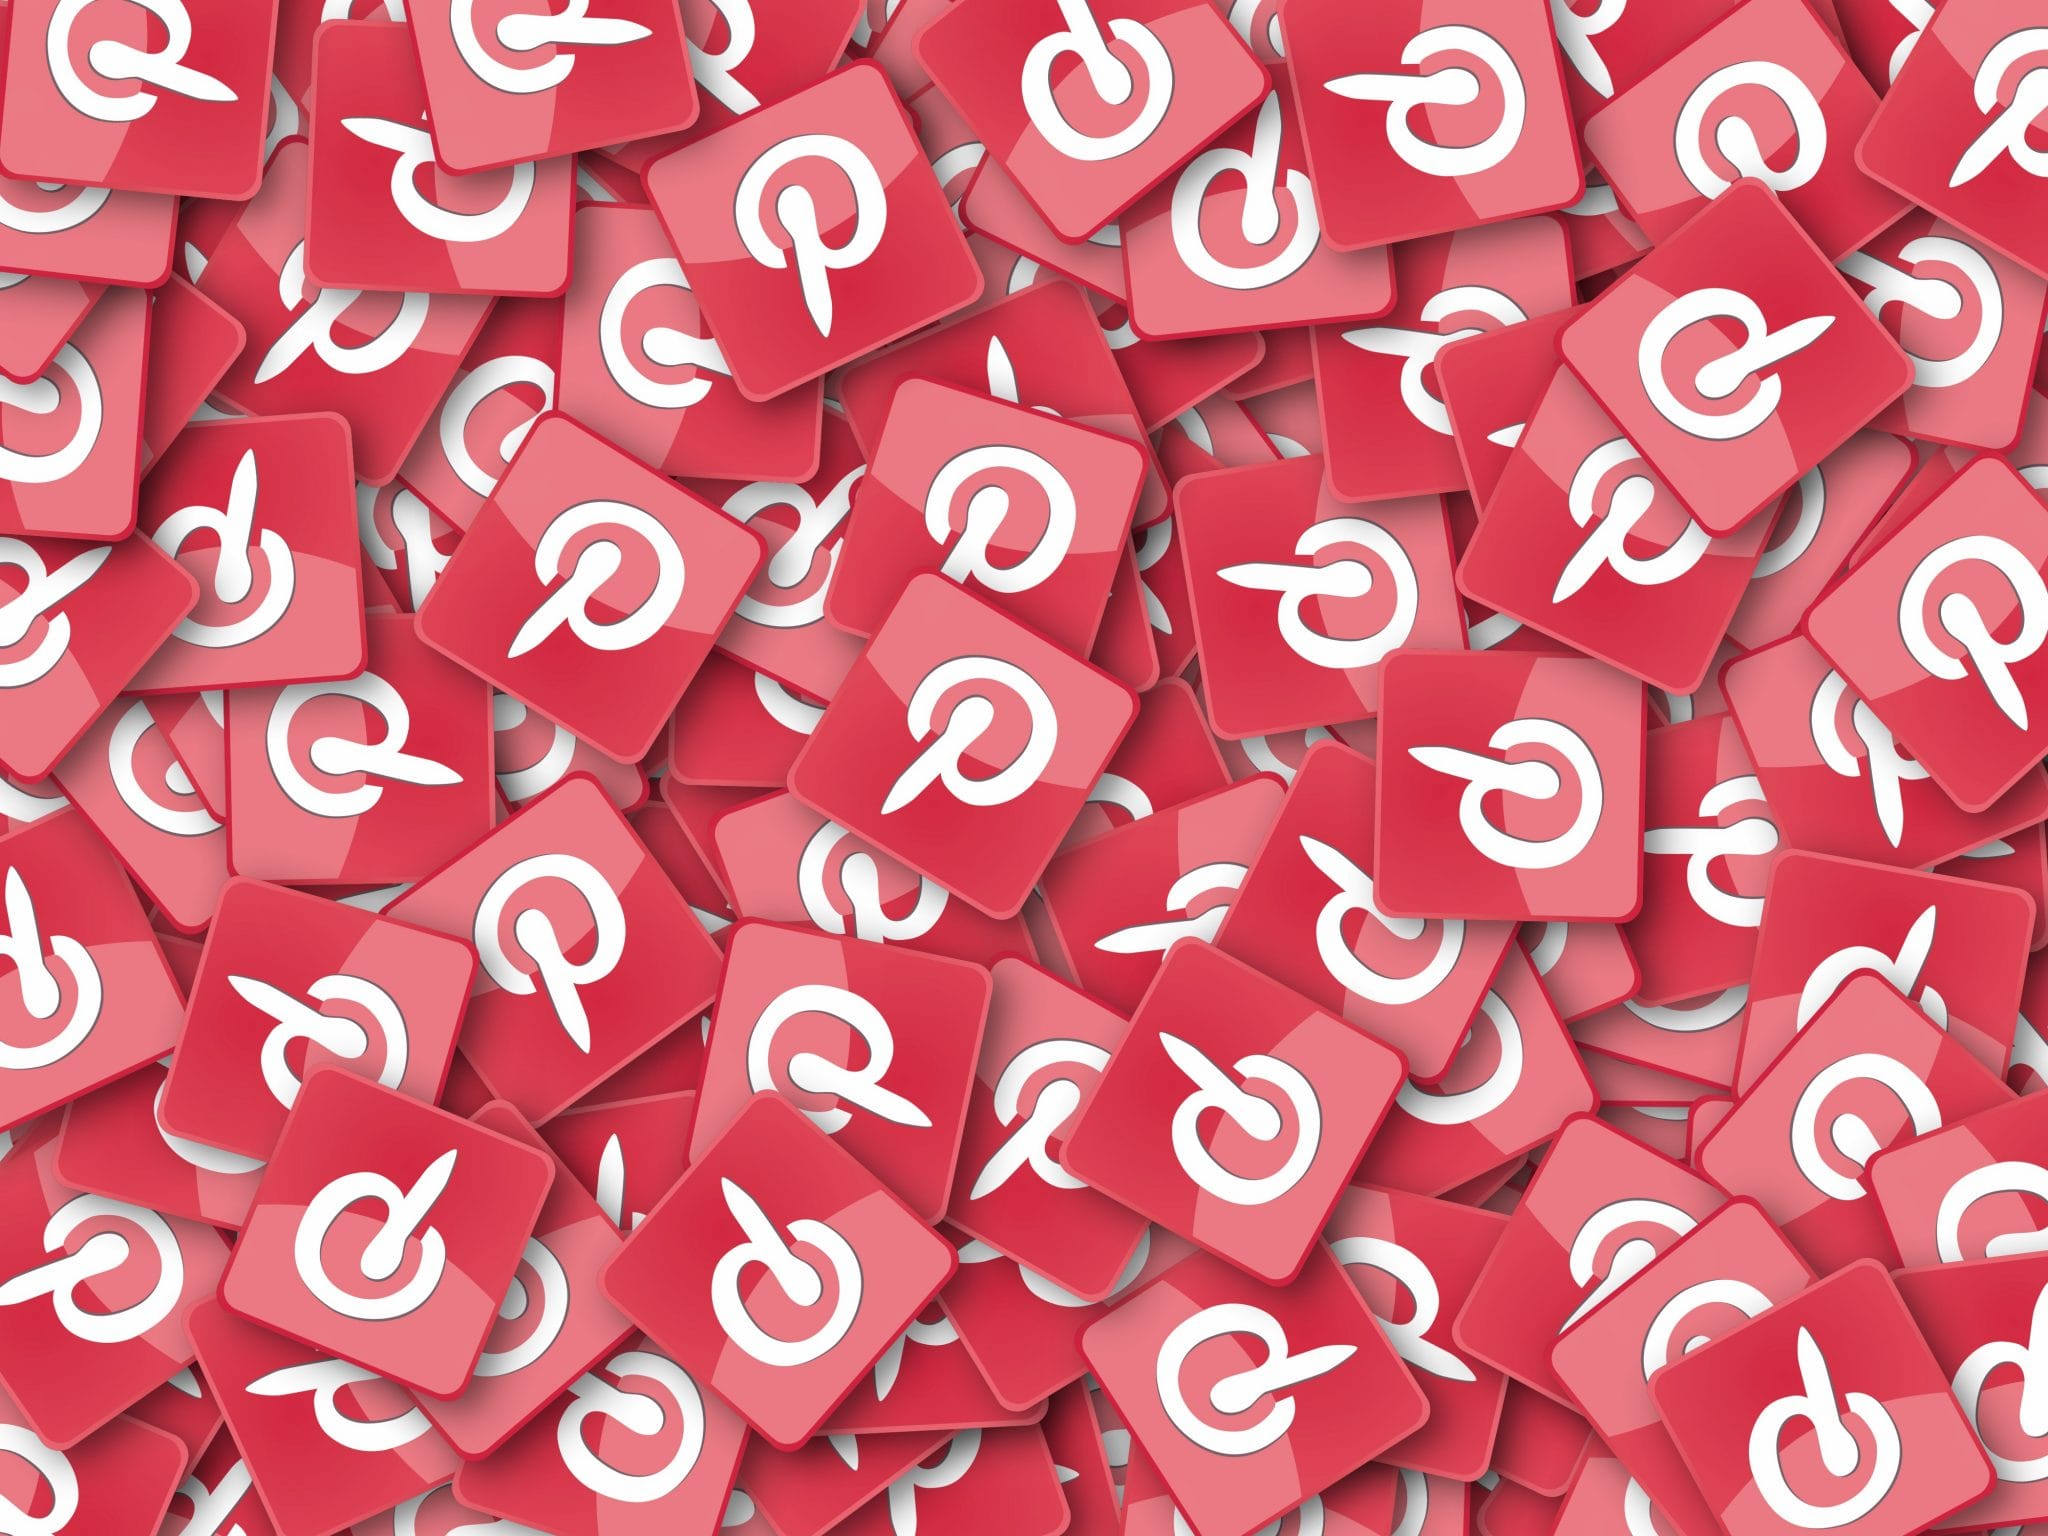 5 Ways to Use Pinterest to Strengthen Your Brand - Sachs Marketing Group